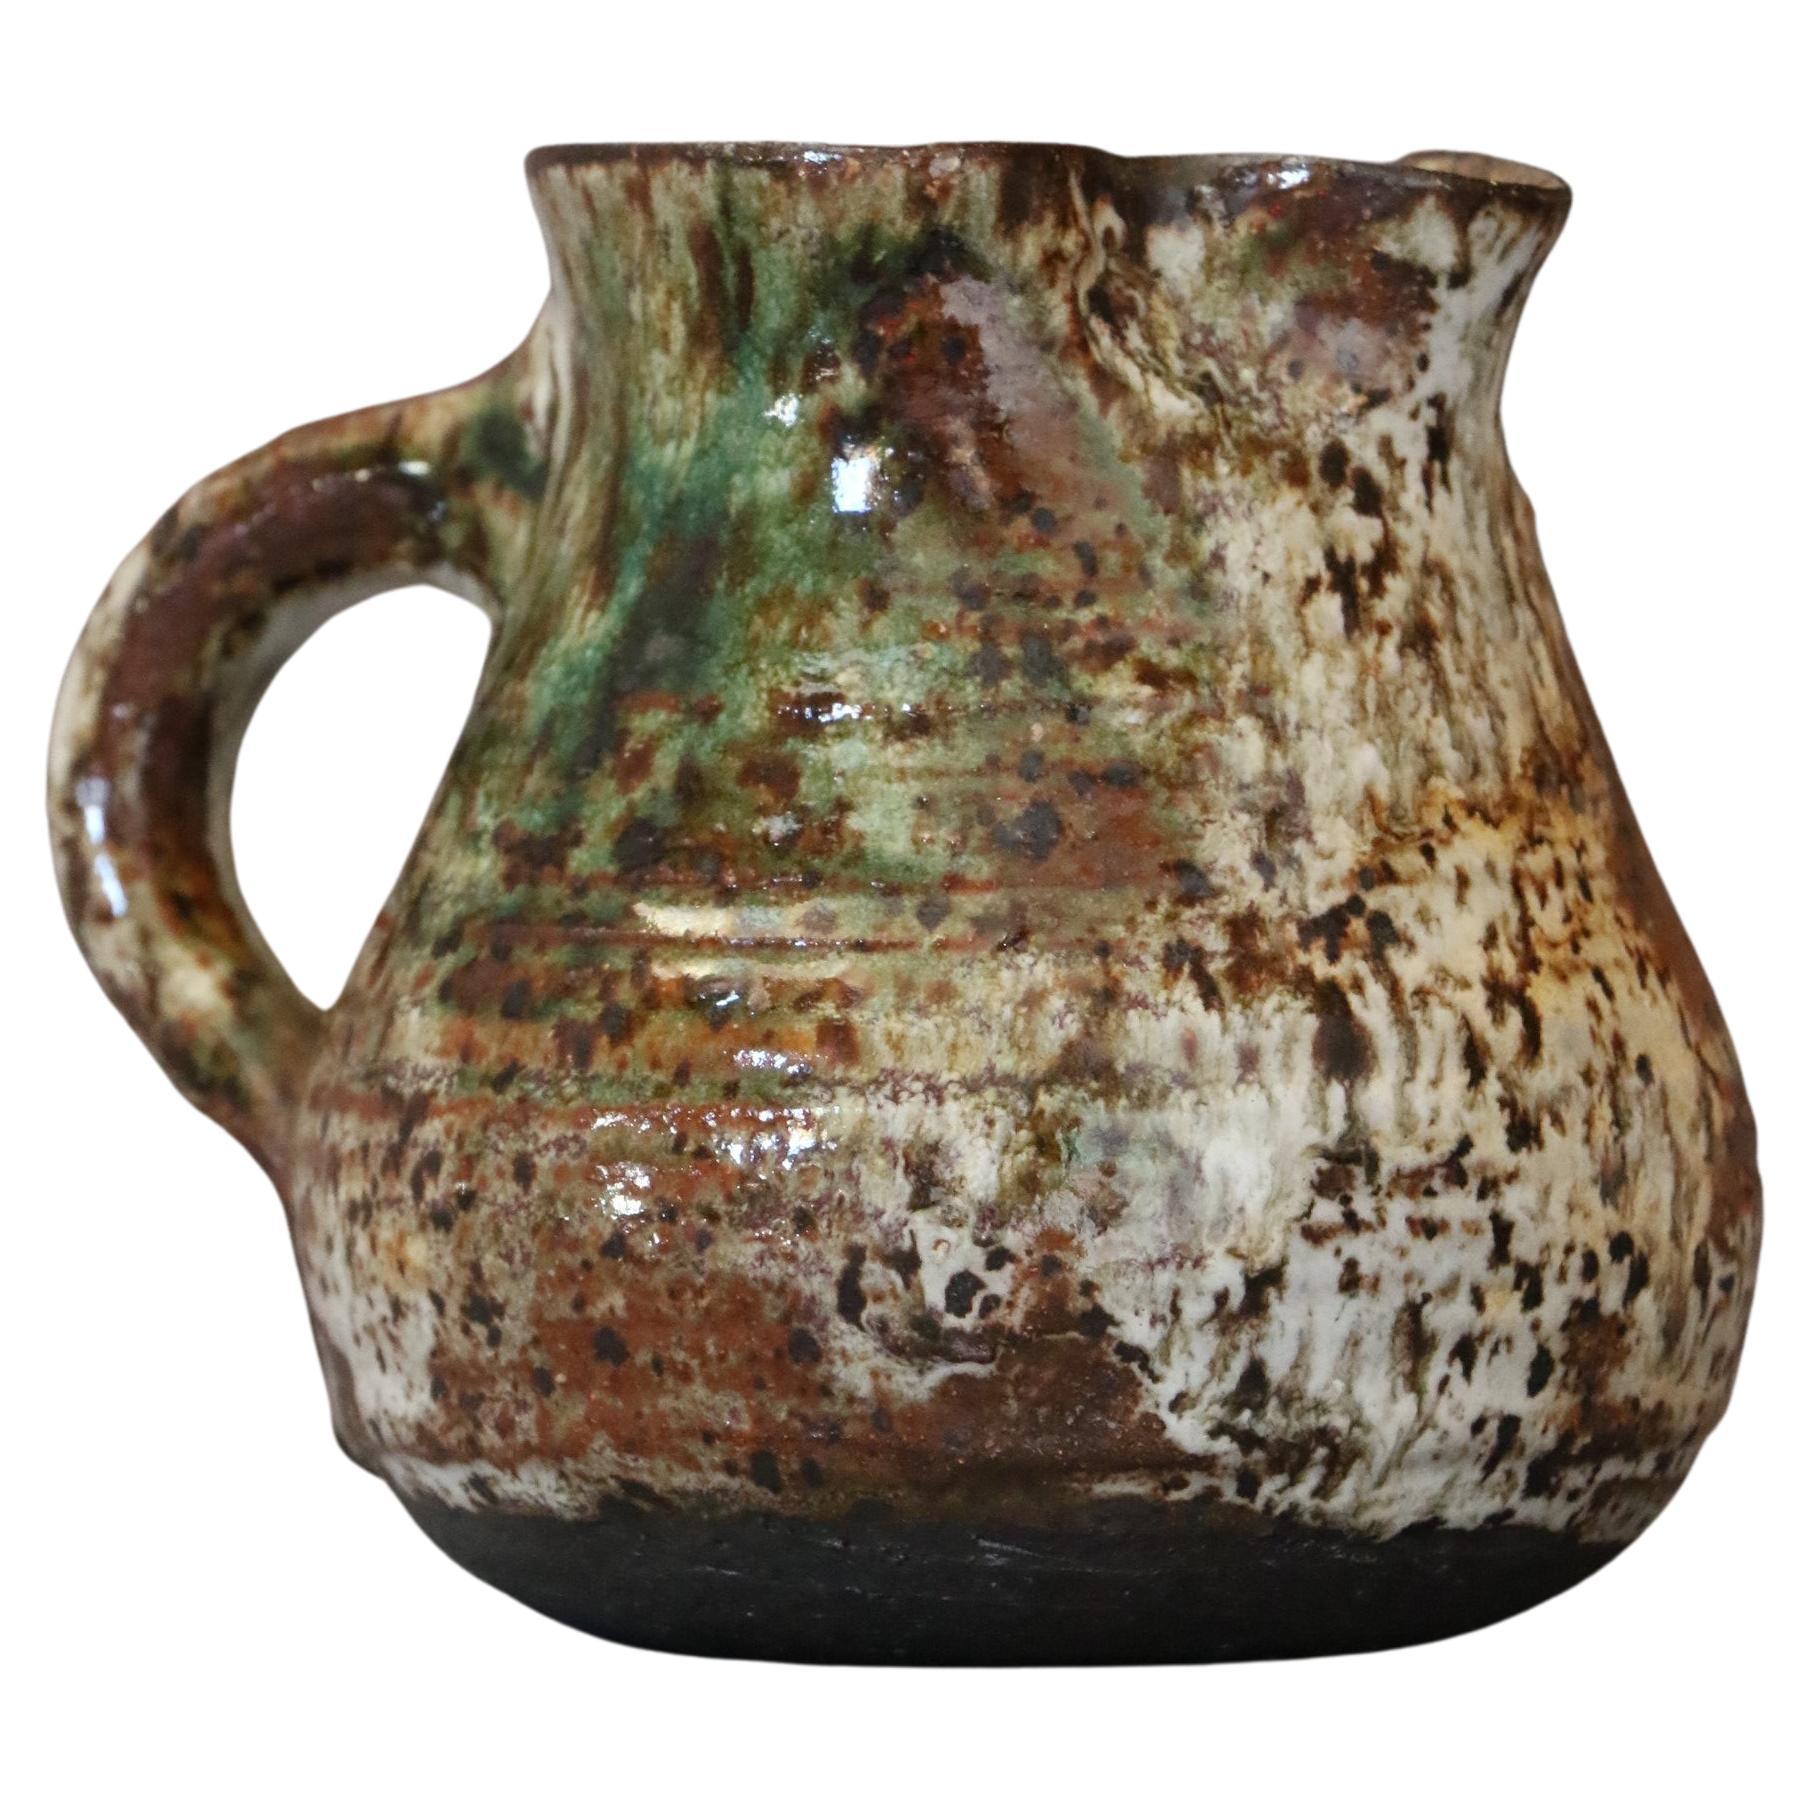 Glazed stoneware zoomorphic pitcher by Cécile Dein, circa 1960. Signed. 

Stoneware pitcher in the shape of an owl glazed in brown and dark green tones. In the style of la Borne pottery. 
Signed on the bottom. The piece is in very good